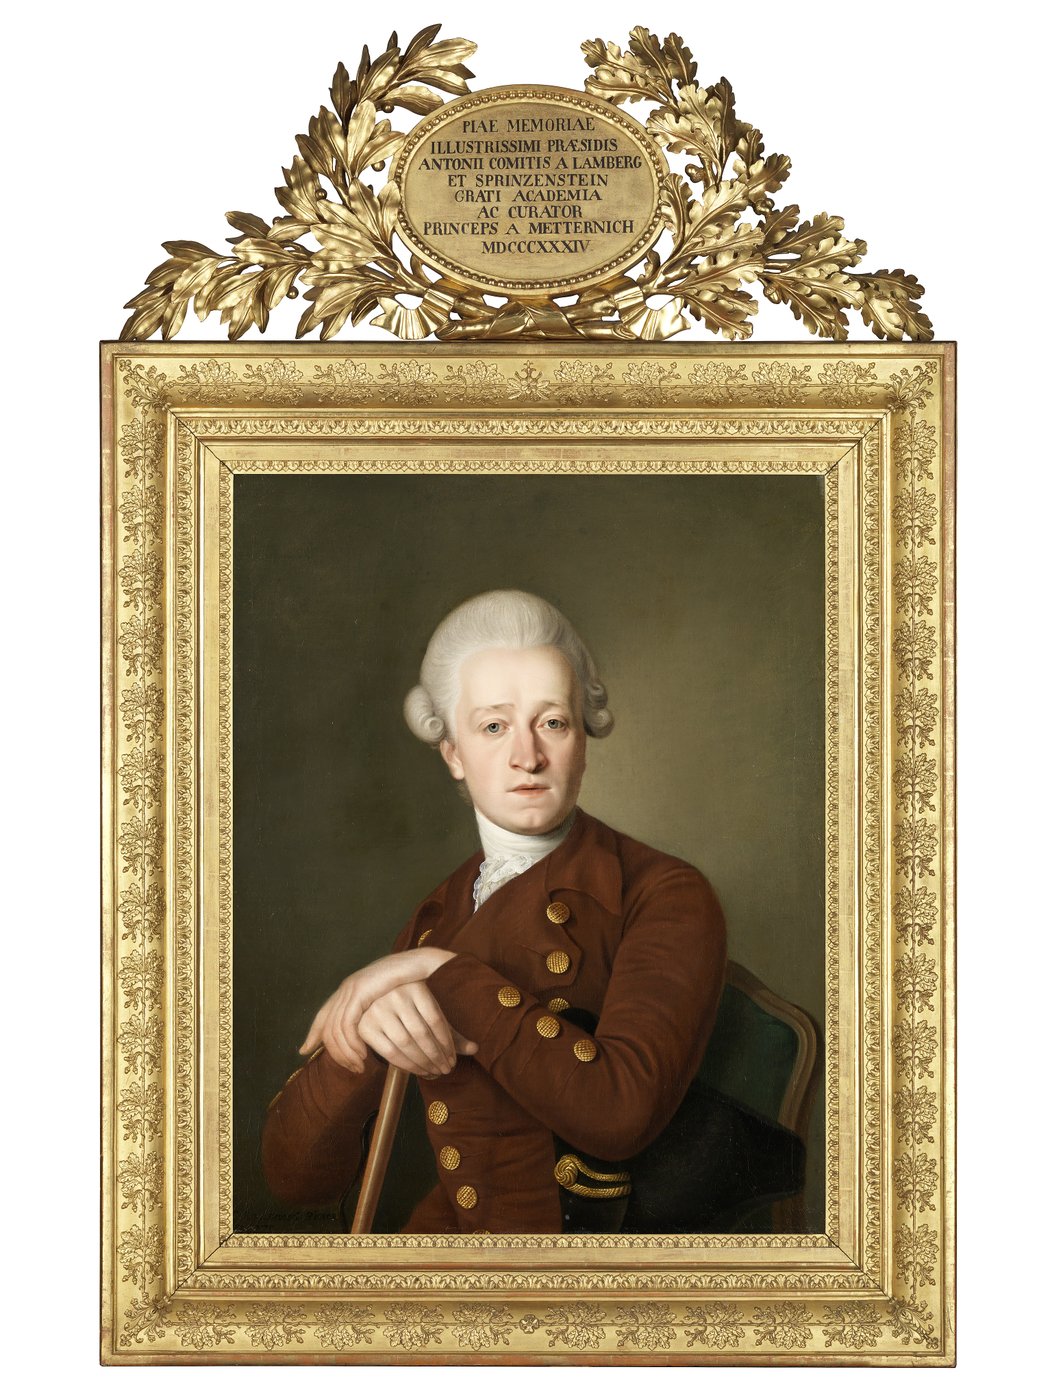 This portrait, stretched in a large, sumptuous gilt frame, shows Count Lamberg-Spritzenstein. The count is portrayed in a seated position from the waist up. His hands rest crossed on a walking stick in front of his chest. His head is turned towards the viewers. The count is depicted with very fair skin and wears a baroque, white-powdered wig with the hair combed strictly back and coiffed in curls on the sides. He wears a brown jacket with a large collar and two rows of round golden buttons. The same buttons are also on the sleeves. Around his neck, the count wears a white frilled collar tucked into his jacket. Under his right arm he holds a black historical tricorn hat. He appears to be sitting in front of an olive green wall. The picture is painted in a realistic style with clear lines. The count looks young, about 30 to 35 years old. His facial expression is serious.